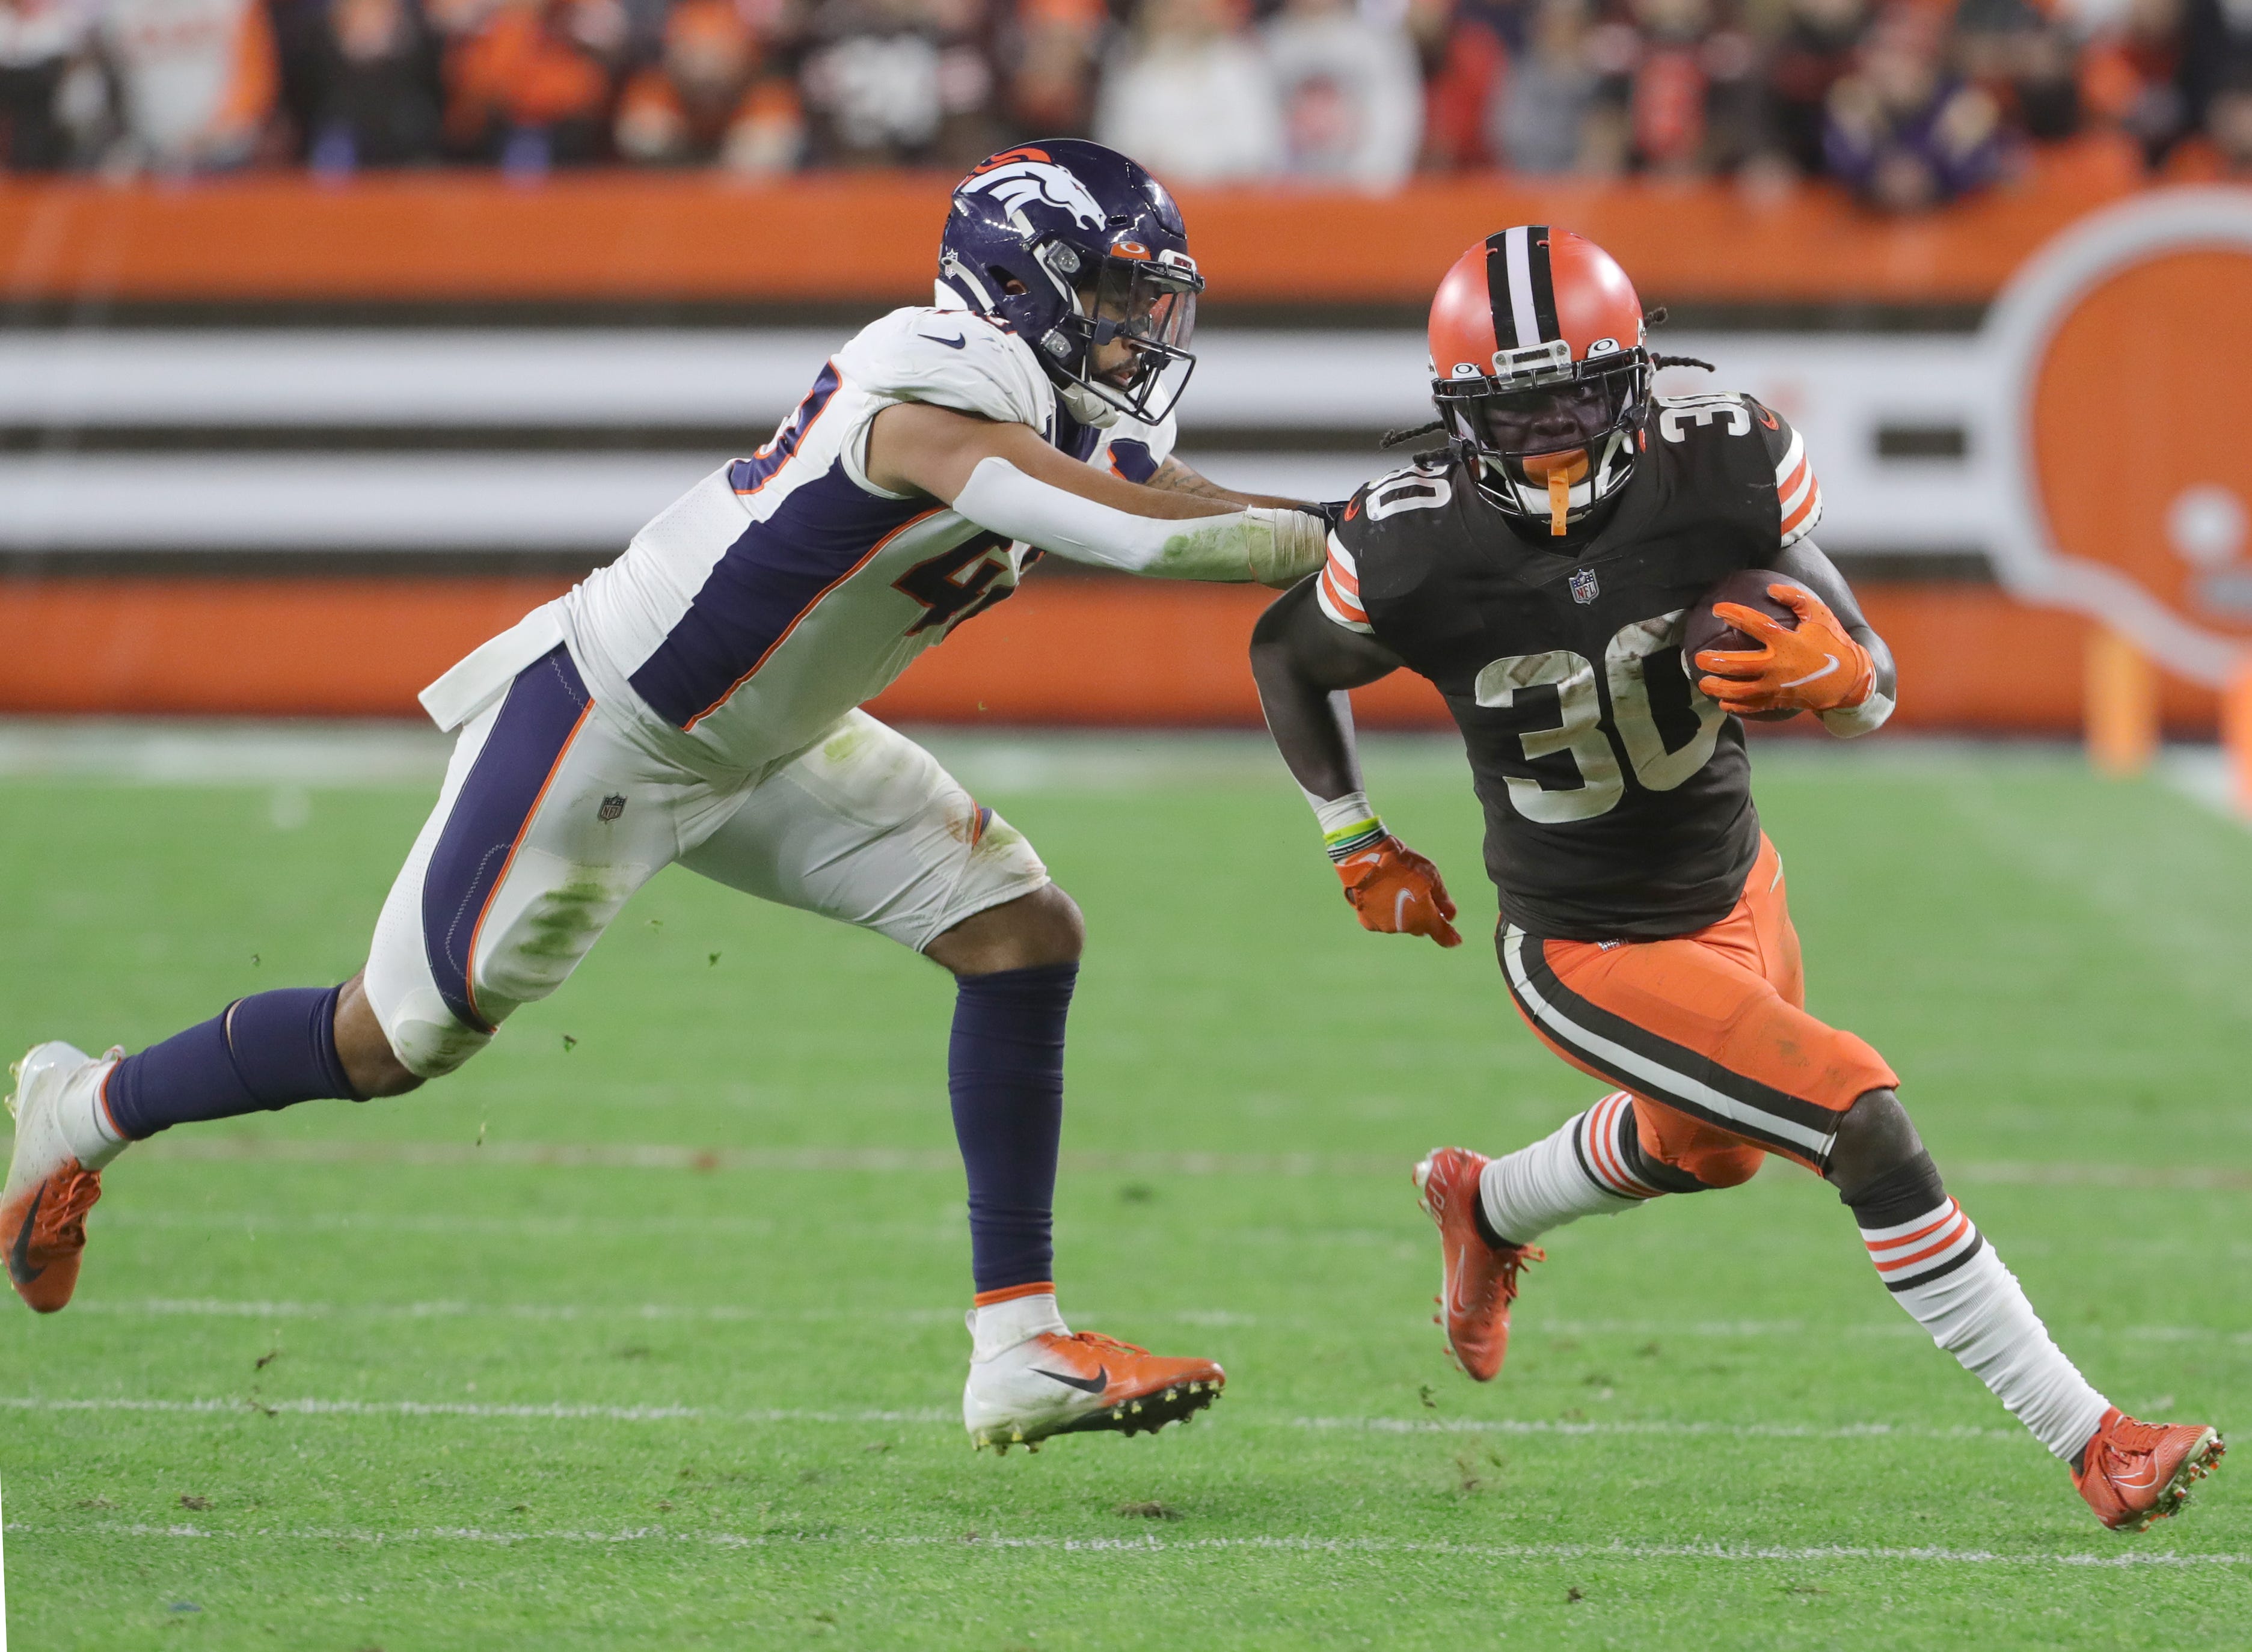 Cleveland Browns running back D'Ernest Johnson gets away from Denver's Justin Strnad on Thursday, Oct. 21, 2021 in Cleveland, Ohio, at FirstEnergy Stadium. The Browns won the game 17-14.